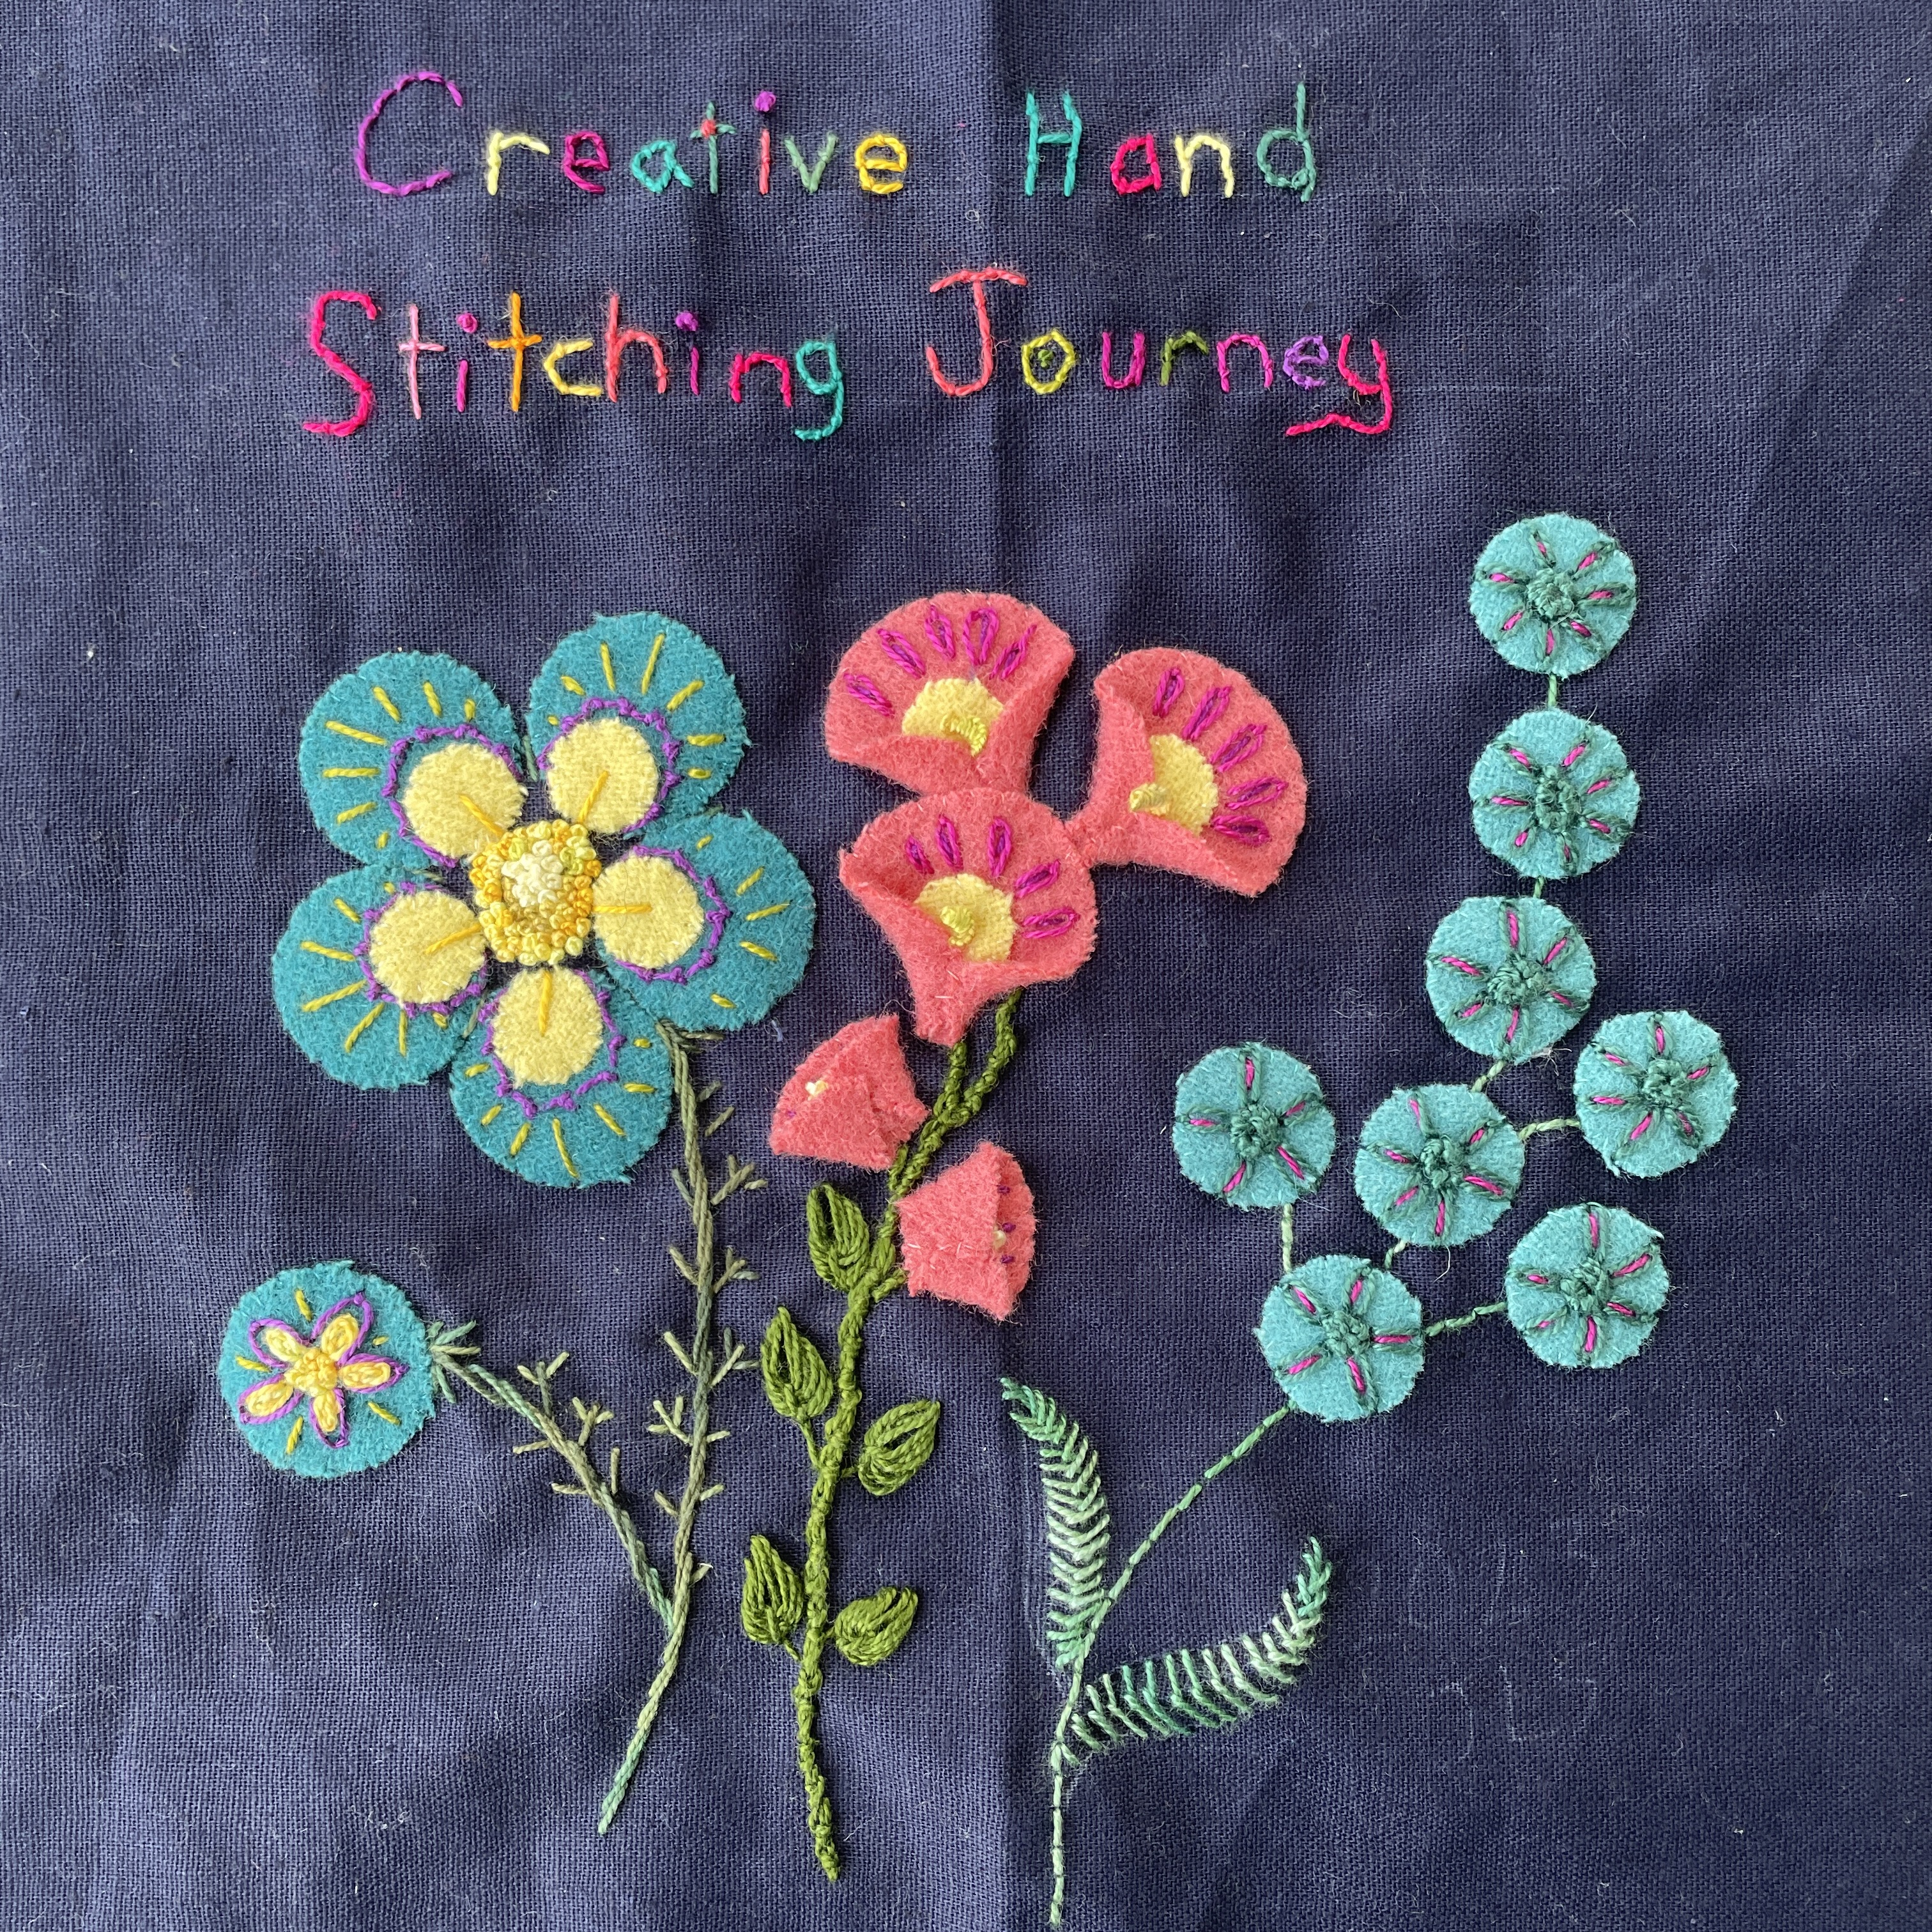 Creative Hand Stitching Journey Cover